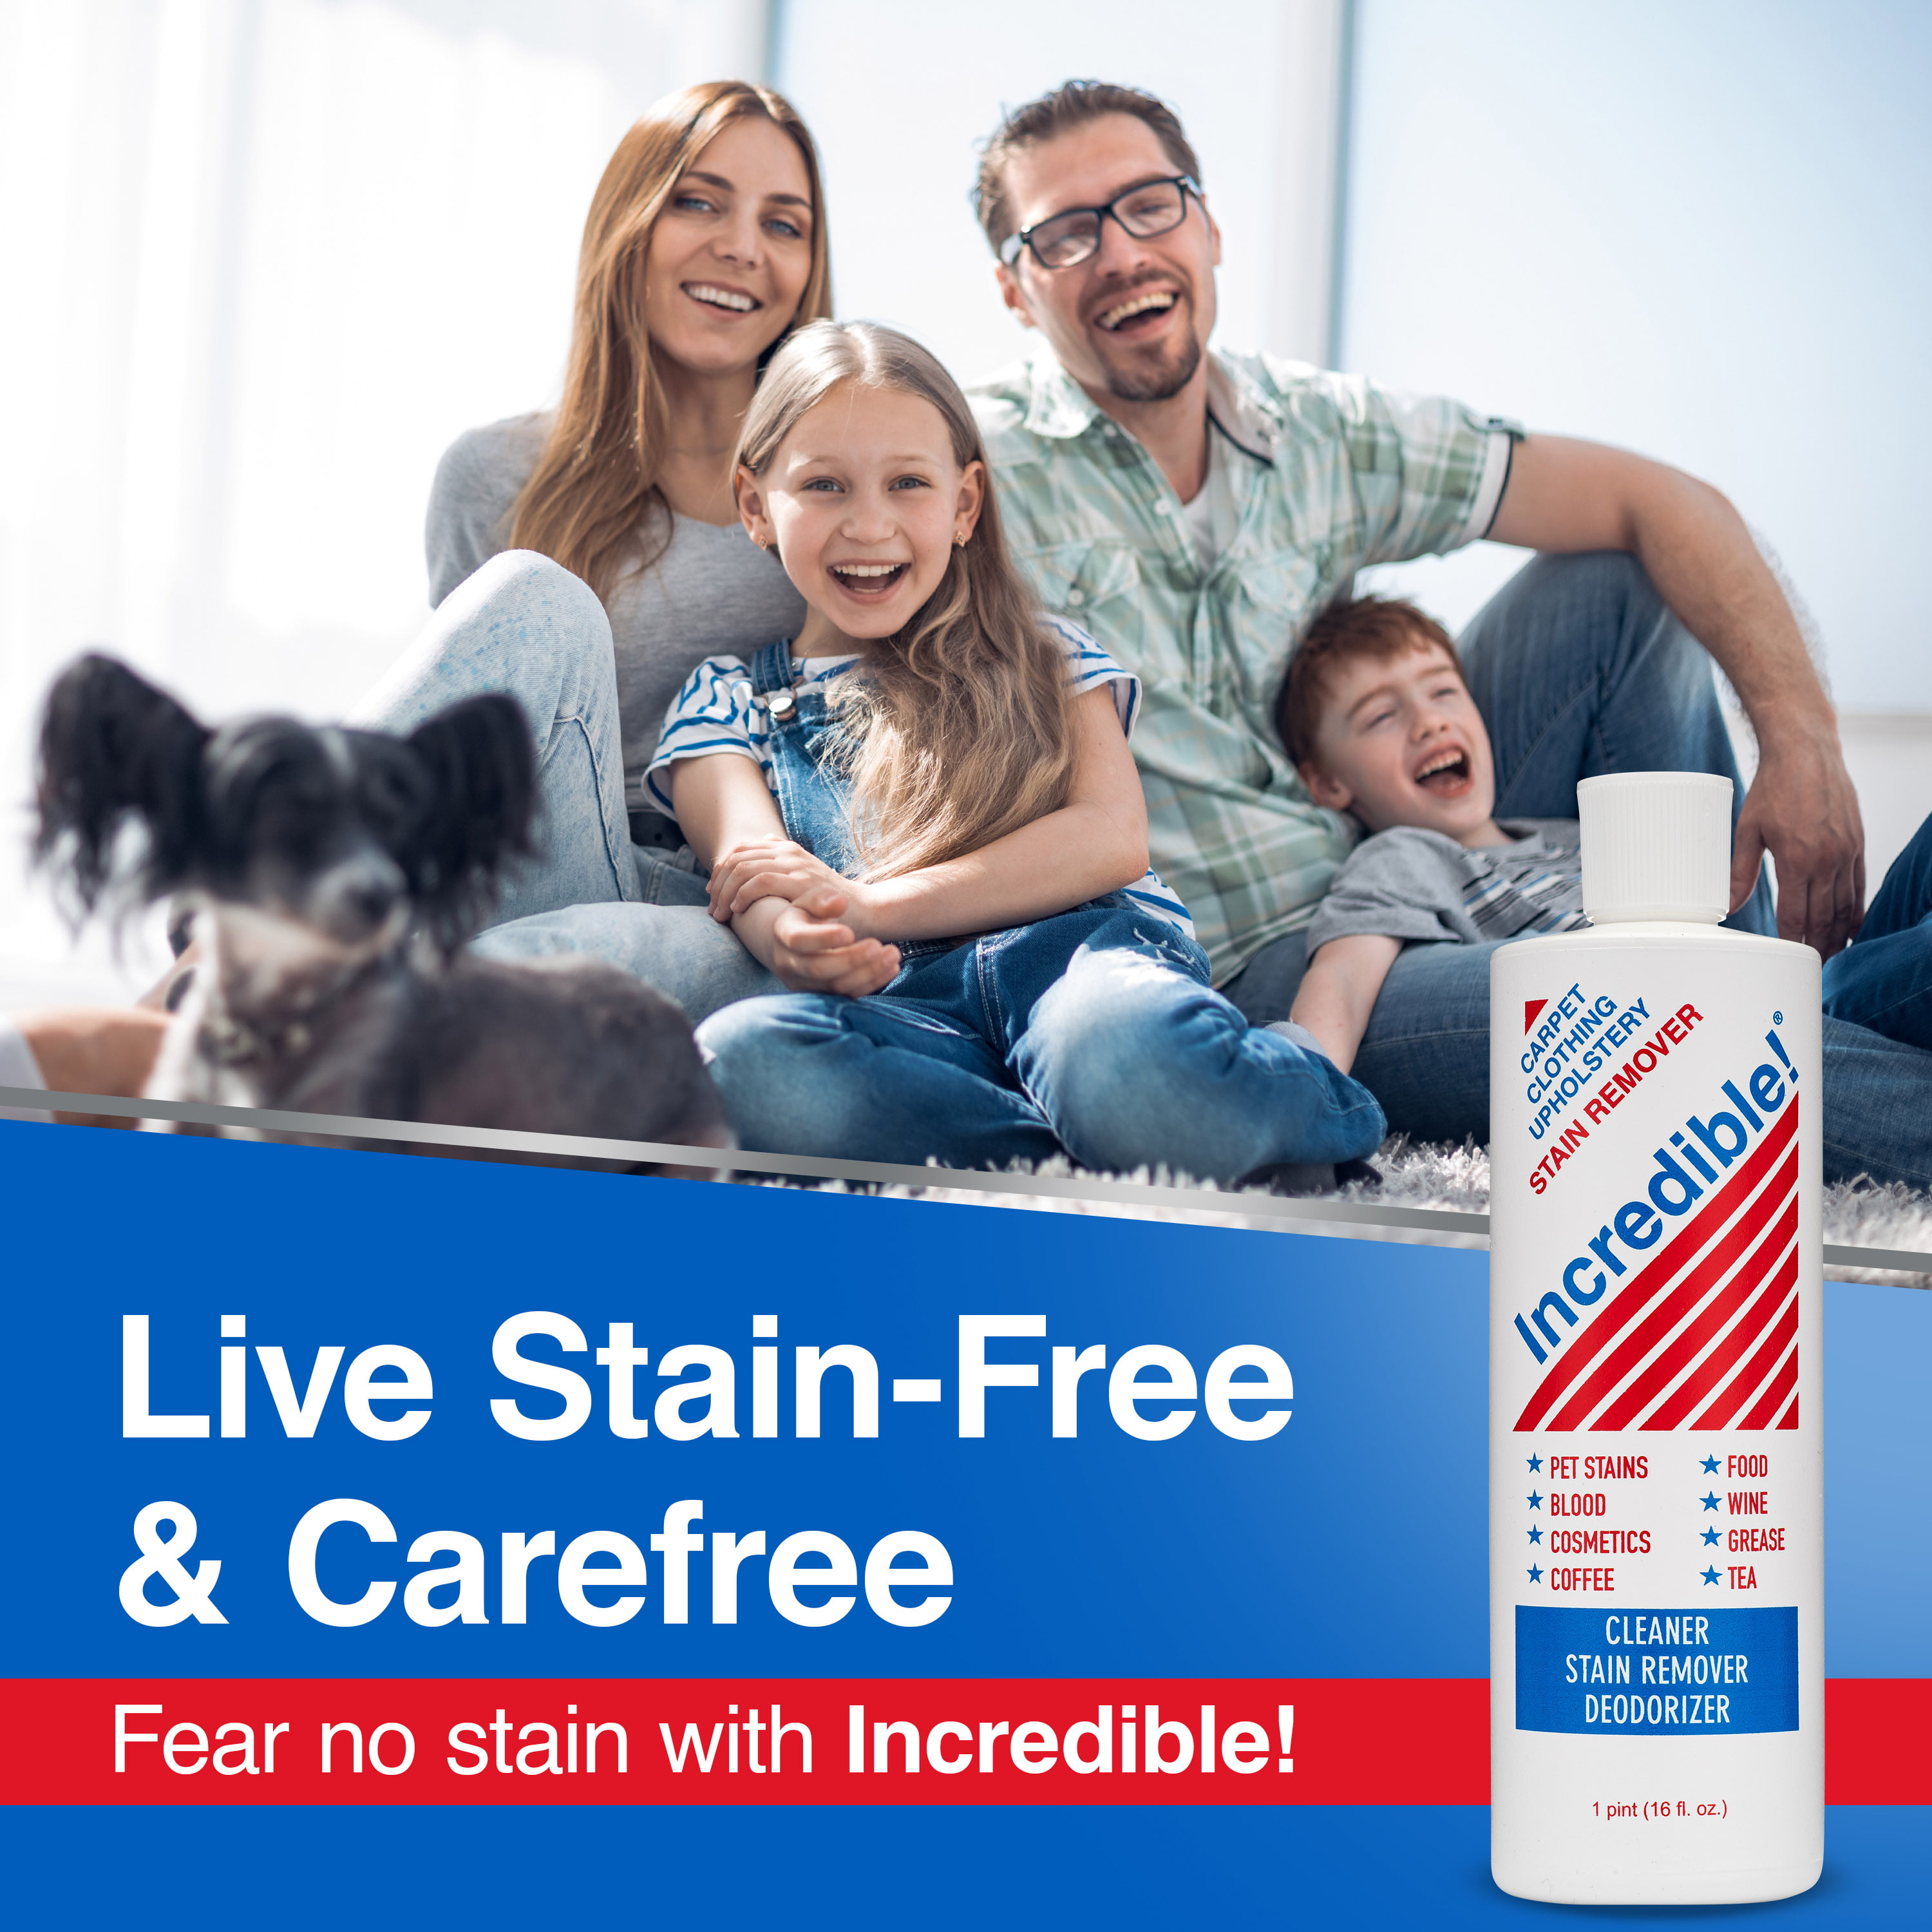 Incredible! Stain Remover - Stain Remover for Clothes, Laundry, Carpets,  Mattress & Upholstery, Removes Pet Stains, Urine, Odors, Red Wine, Grease